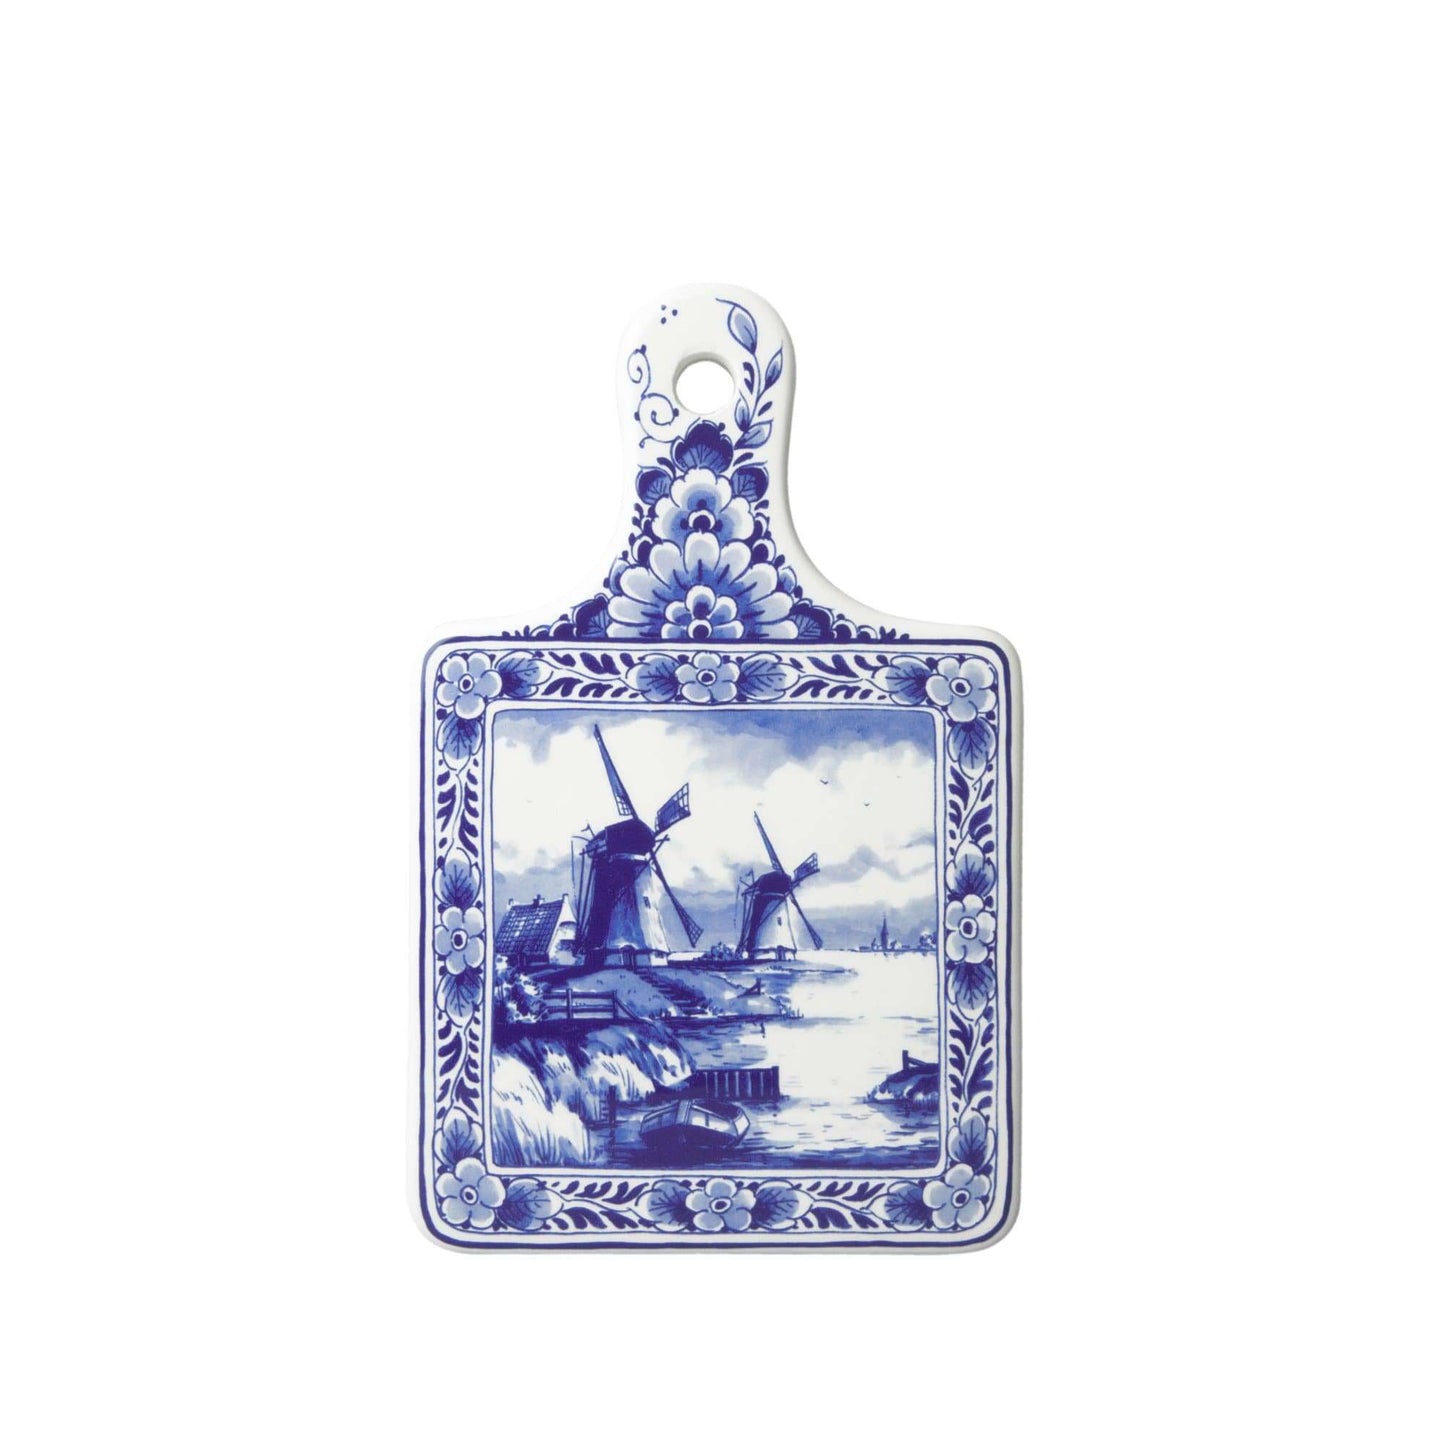 Delft Blue Cheese Board with Windmills, Small